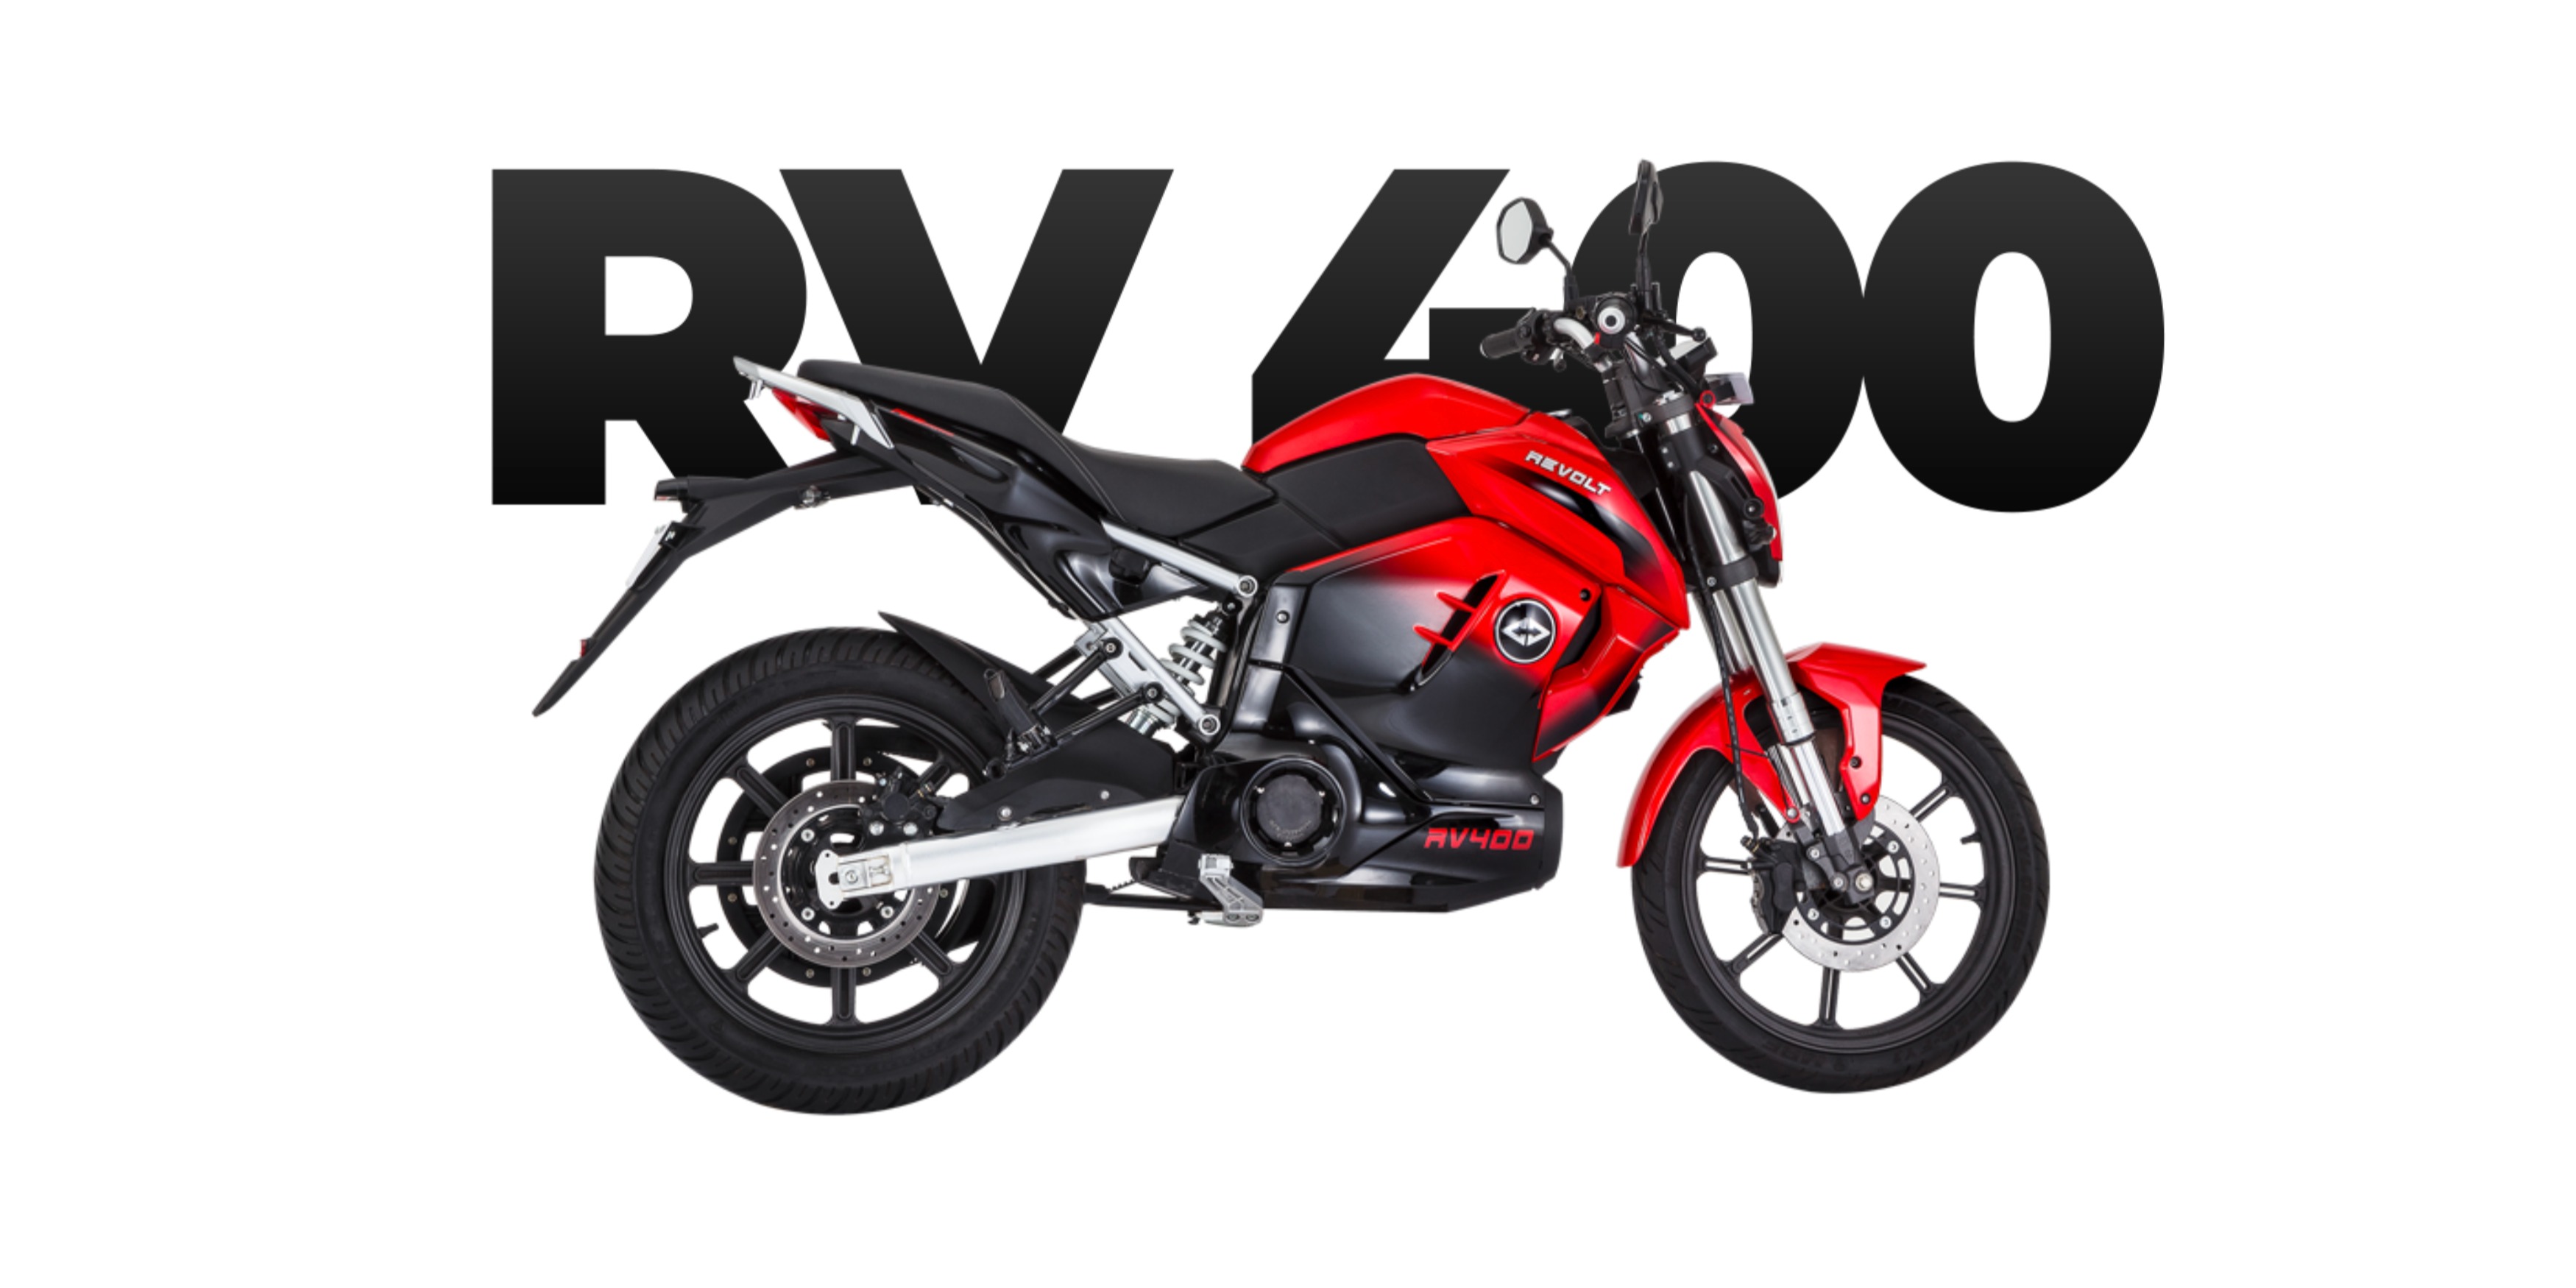 Revolt Unveils 150cc Class Electric Motorcycle With Nearly 100